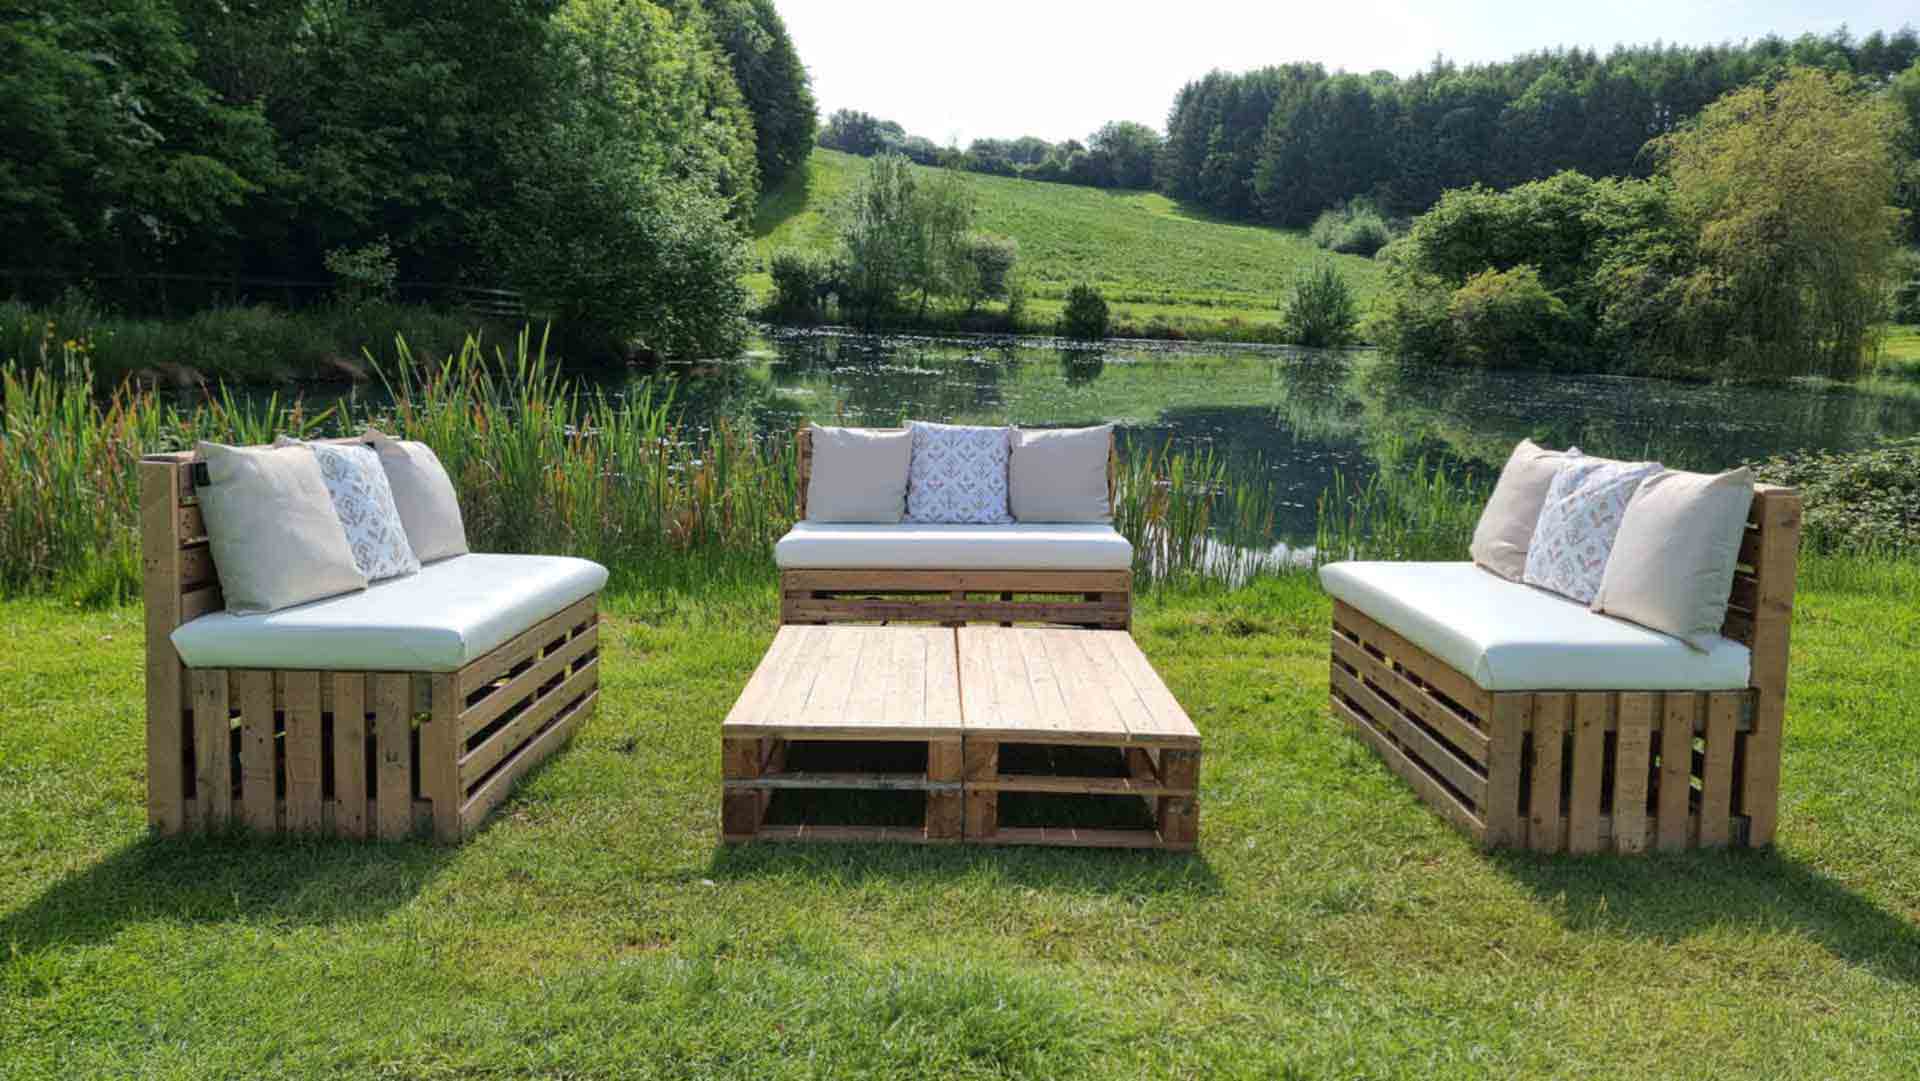 Pallet Benches and Tables in a Beautiful Lakeside Setting